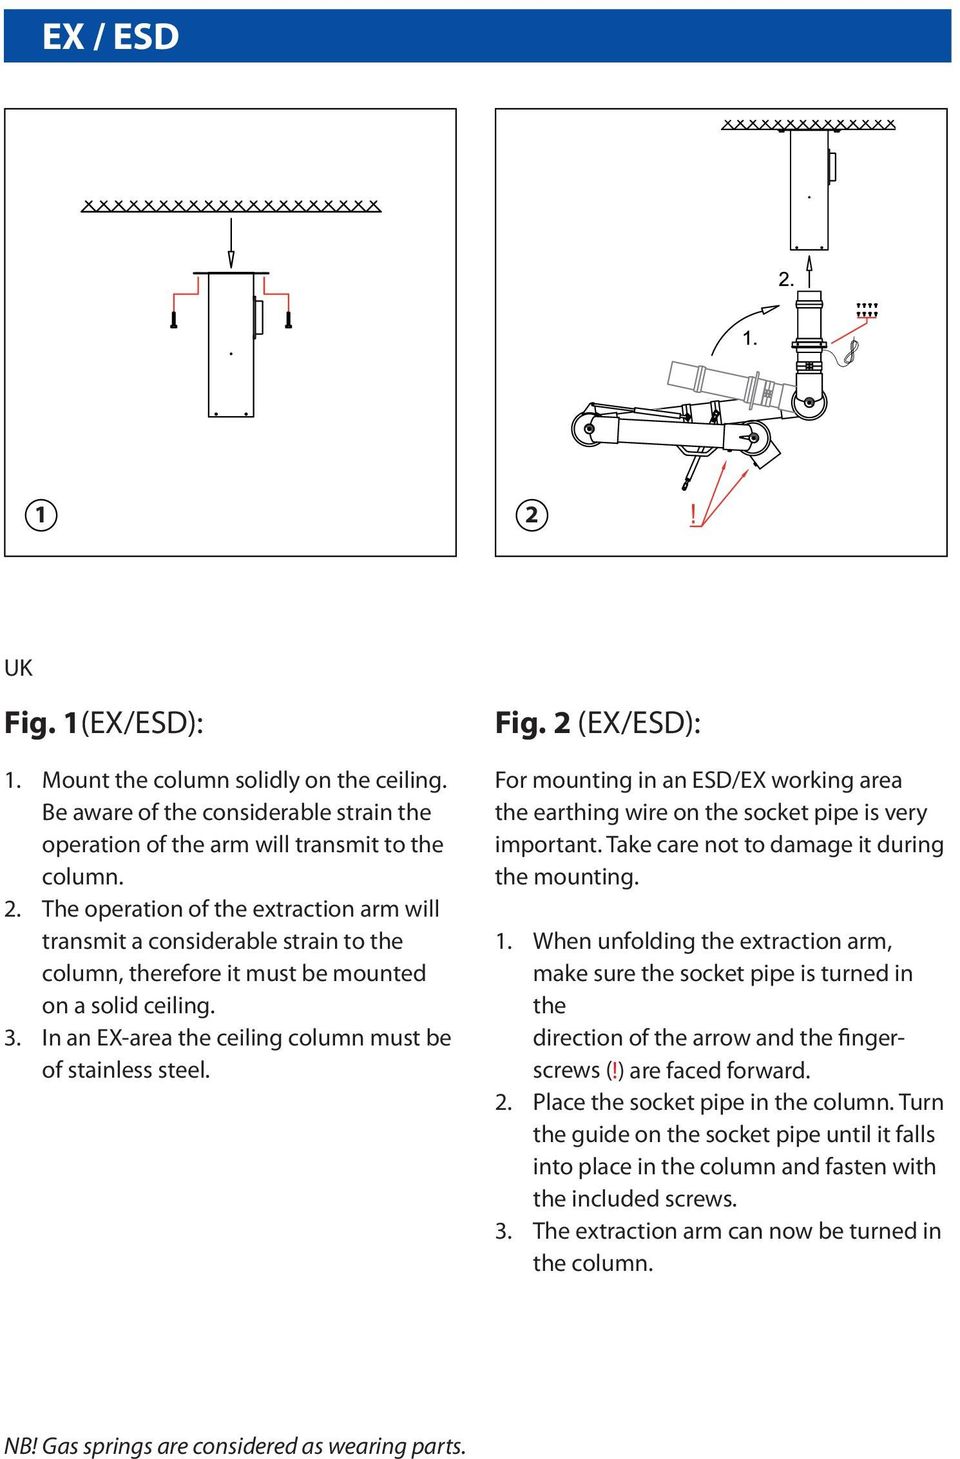 Take care not to damage it during the mounting. 1. When unfolding the extraction arm, make sure the socket pipe is turned in the direction of the arrow and the fingerscrews (!) are faced forward. 2.